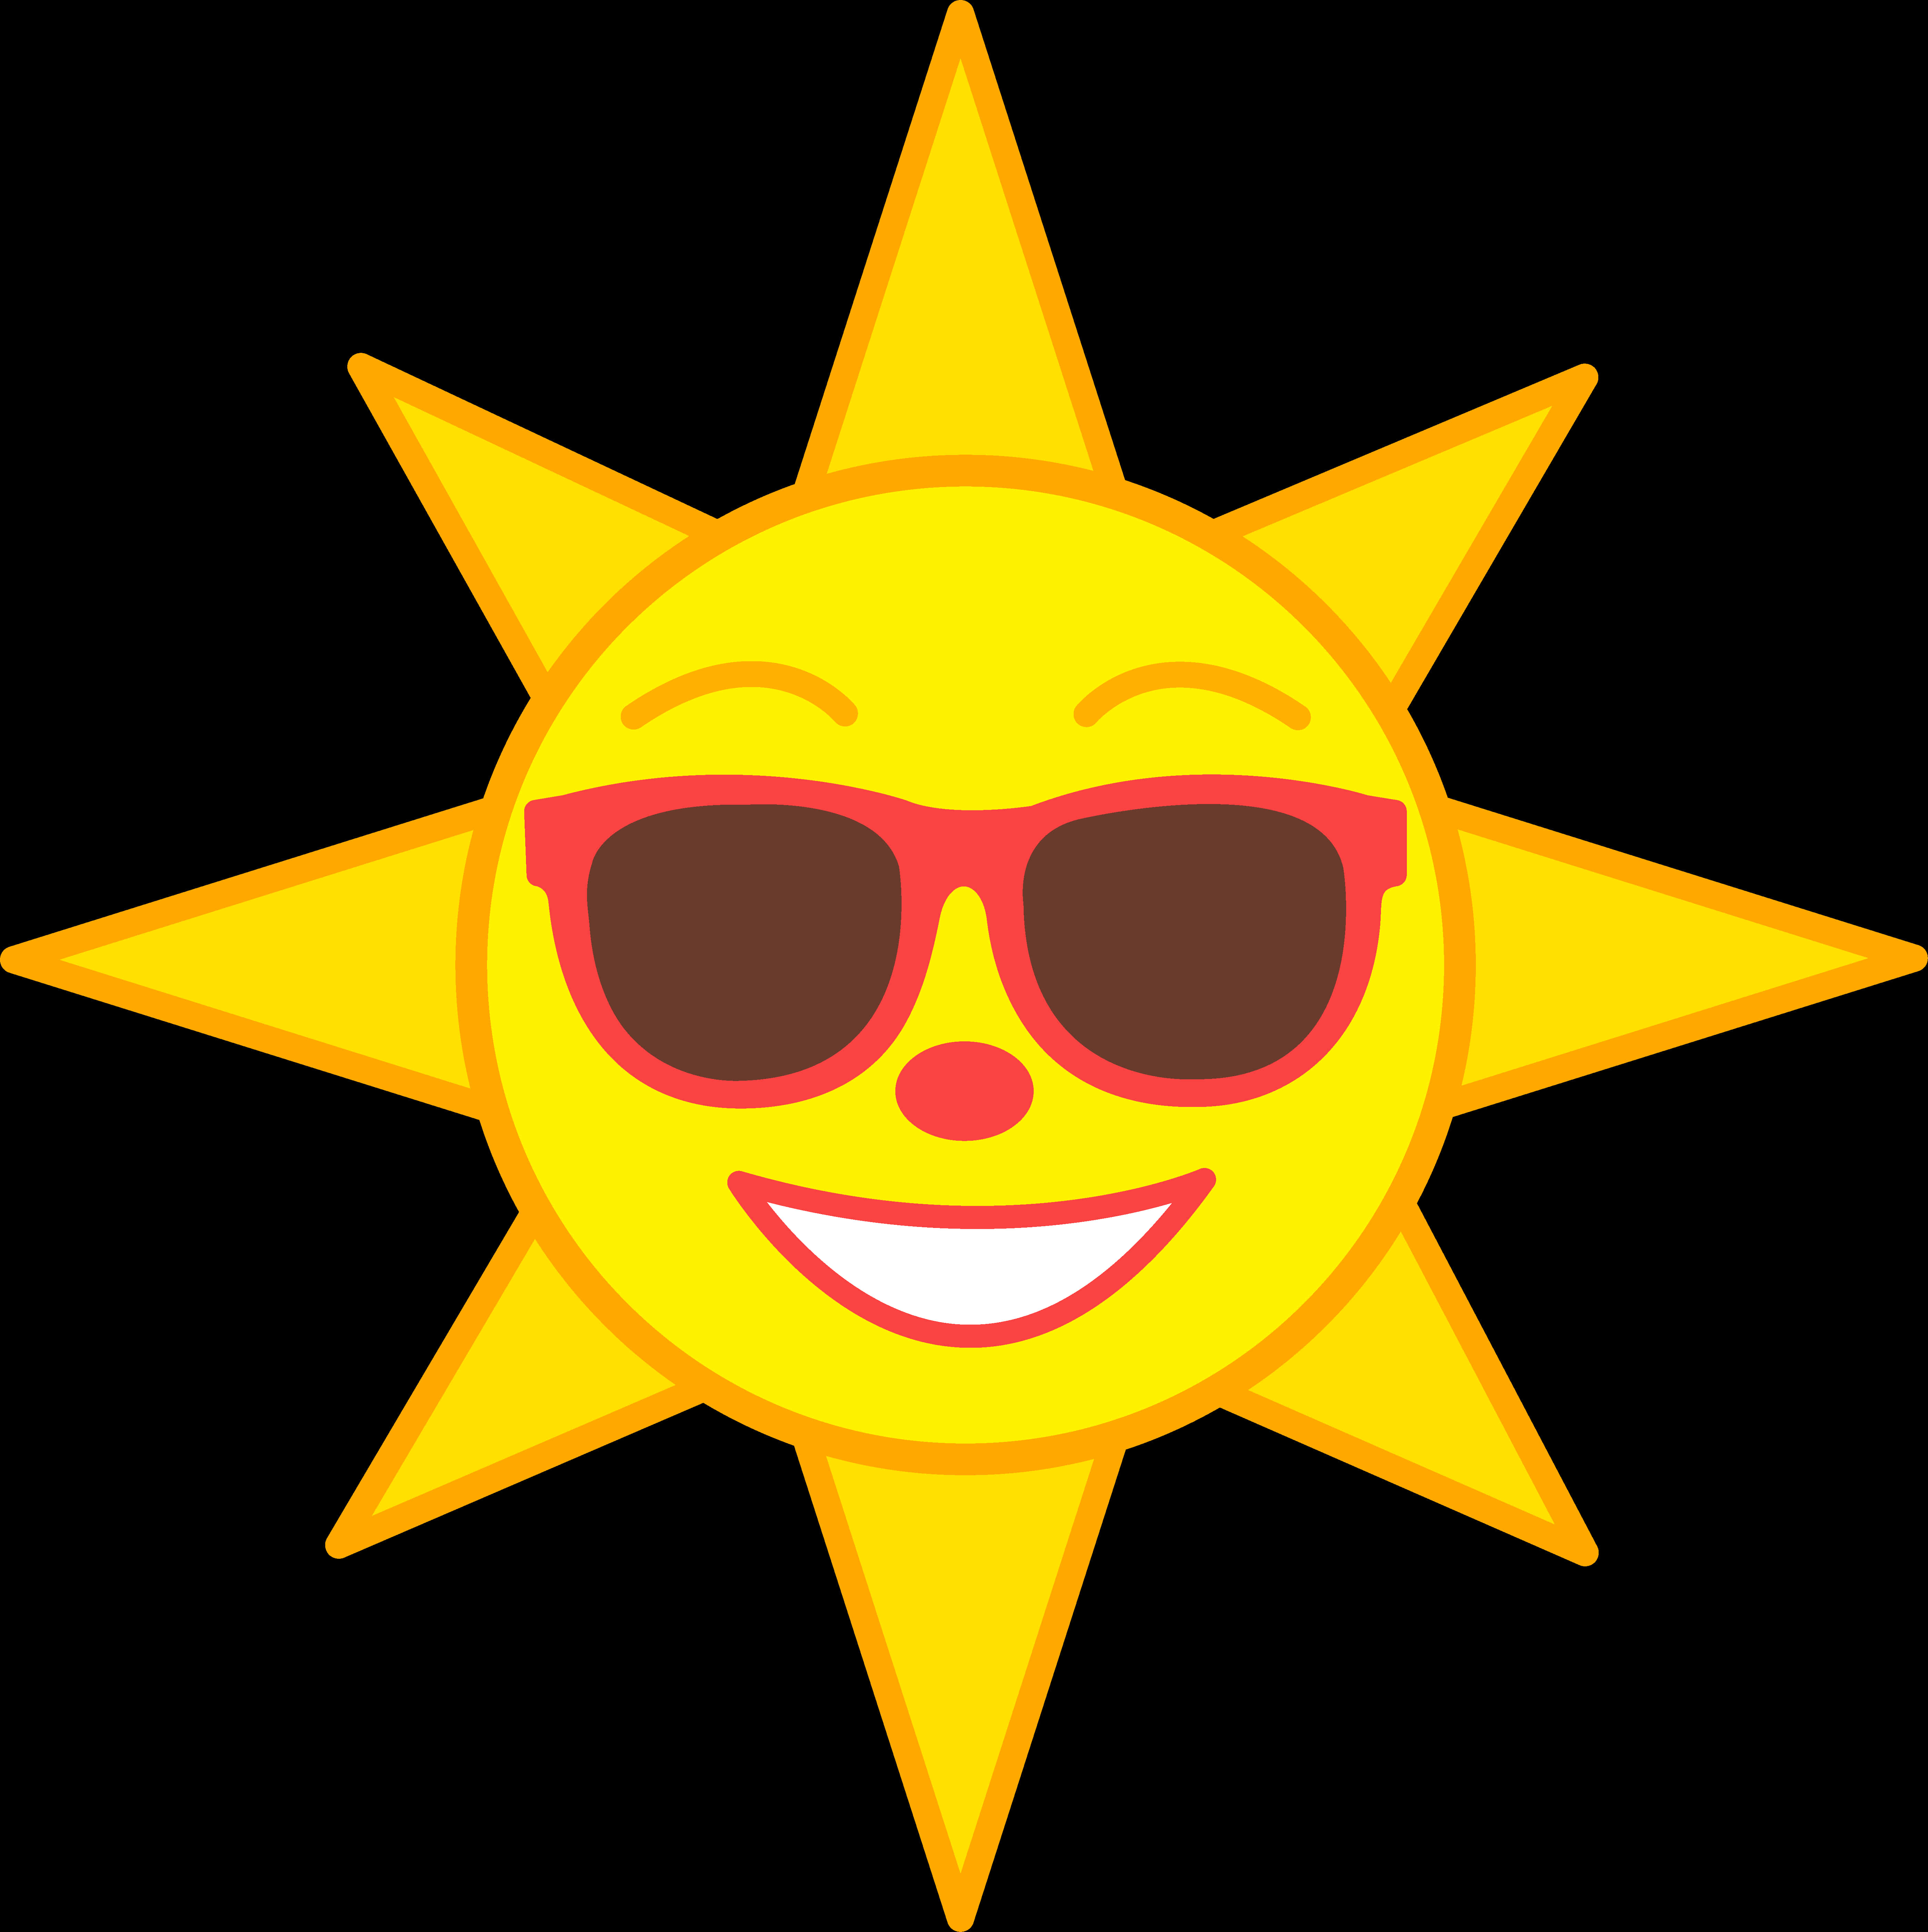 Smiling Sun With Sunglasses Transparent Background PNG